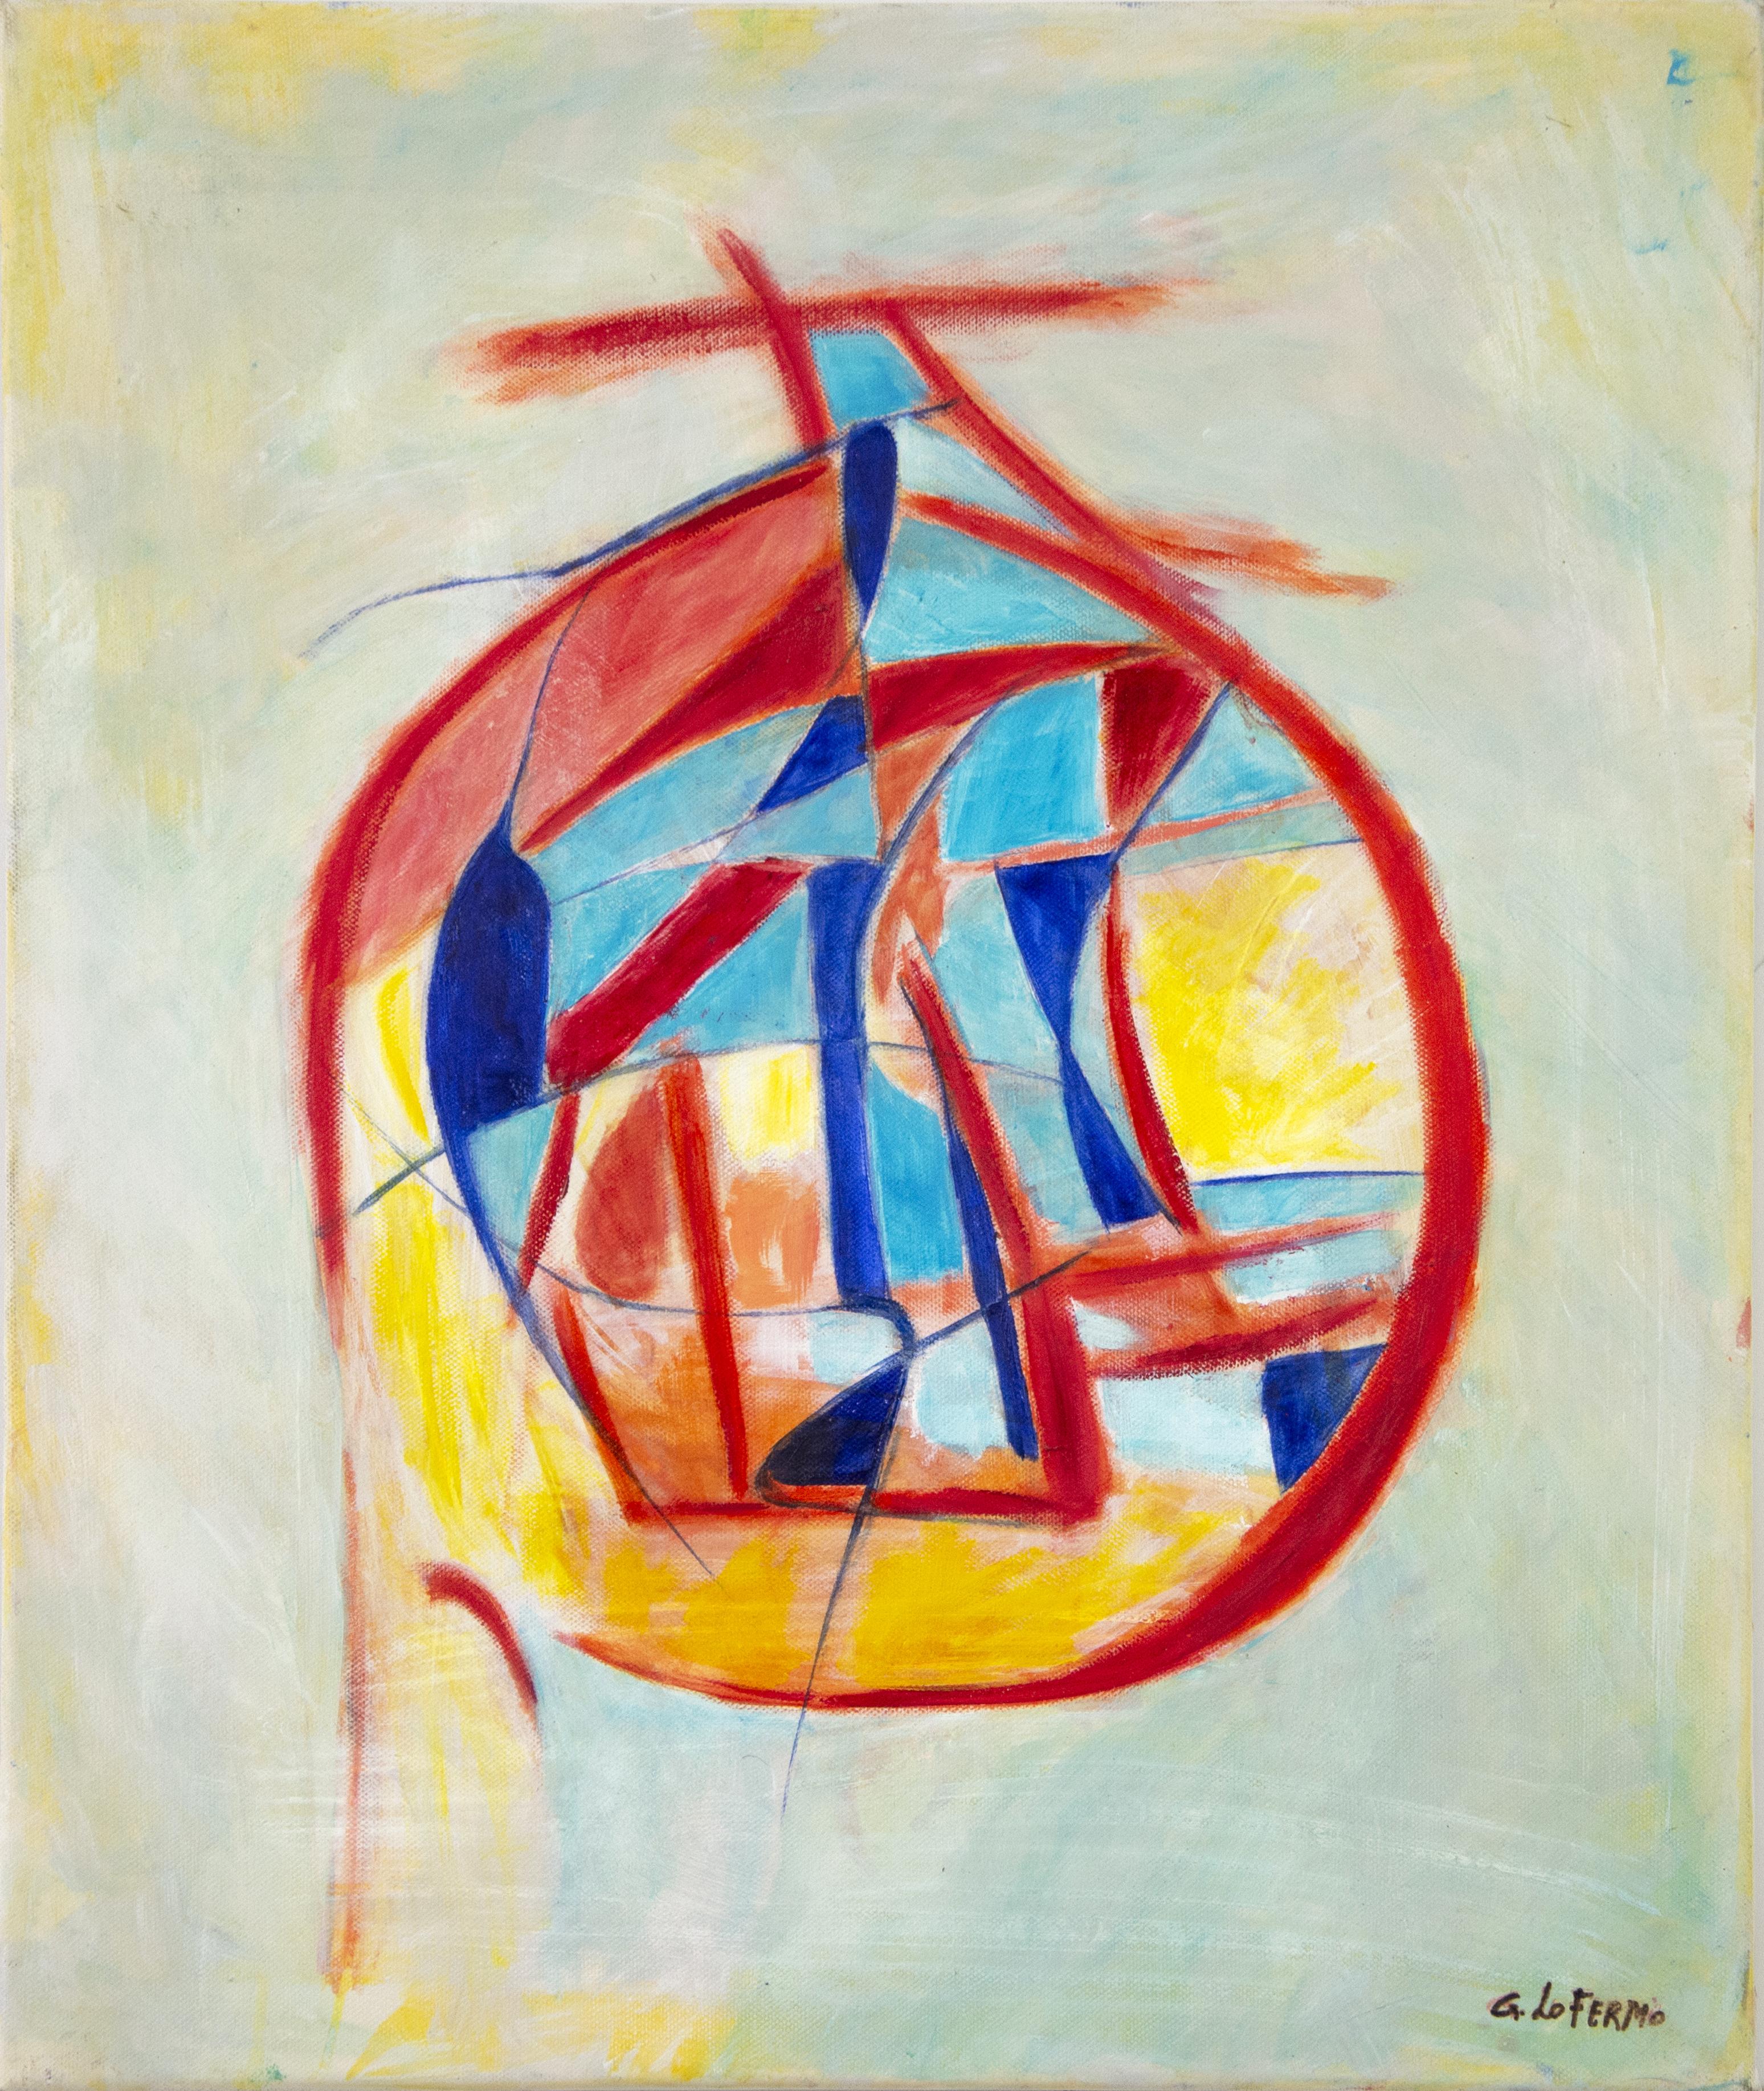 The Ball is an original oil on canvas realized by Giorgio Lo Fermo in 2020.

Hand-signed on the lower right margin.

Hand signed and dated by the artist on the back.

The artwork represents an abstract composition with different colored shapes

Good